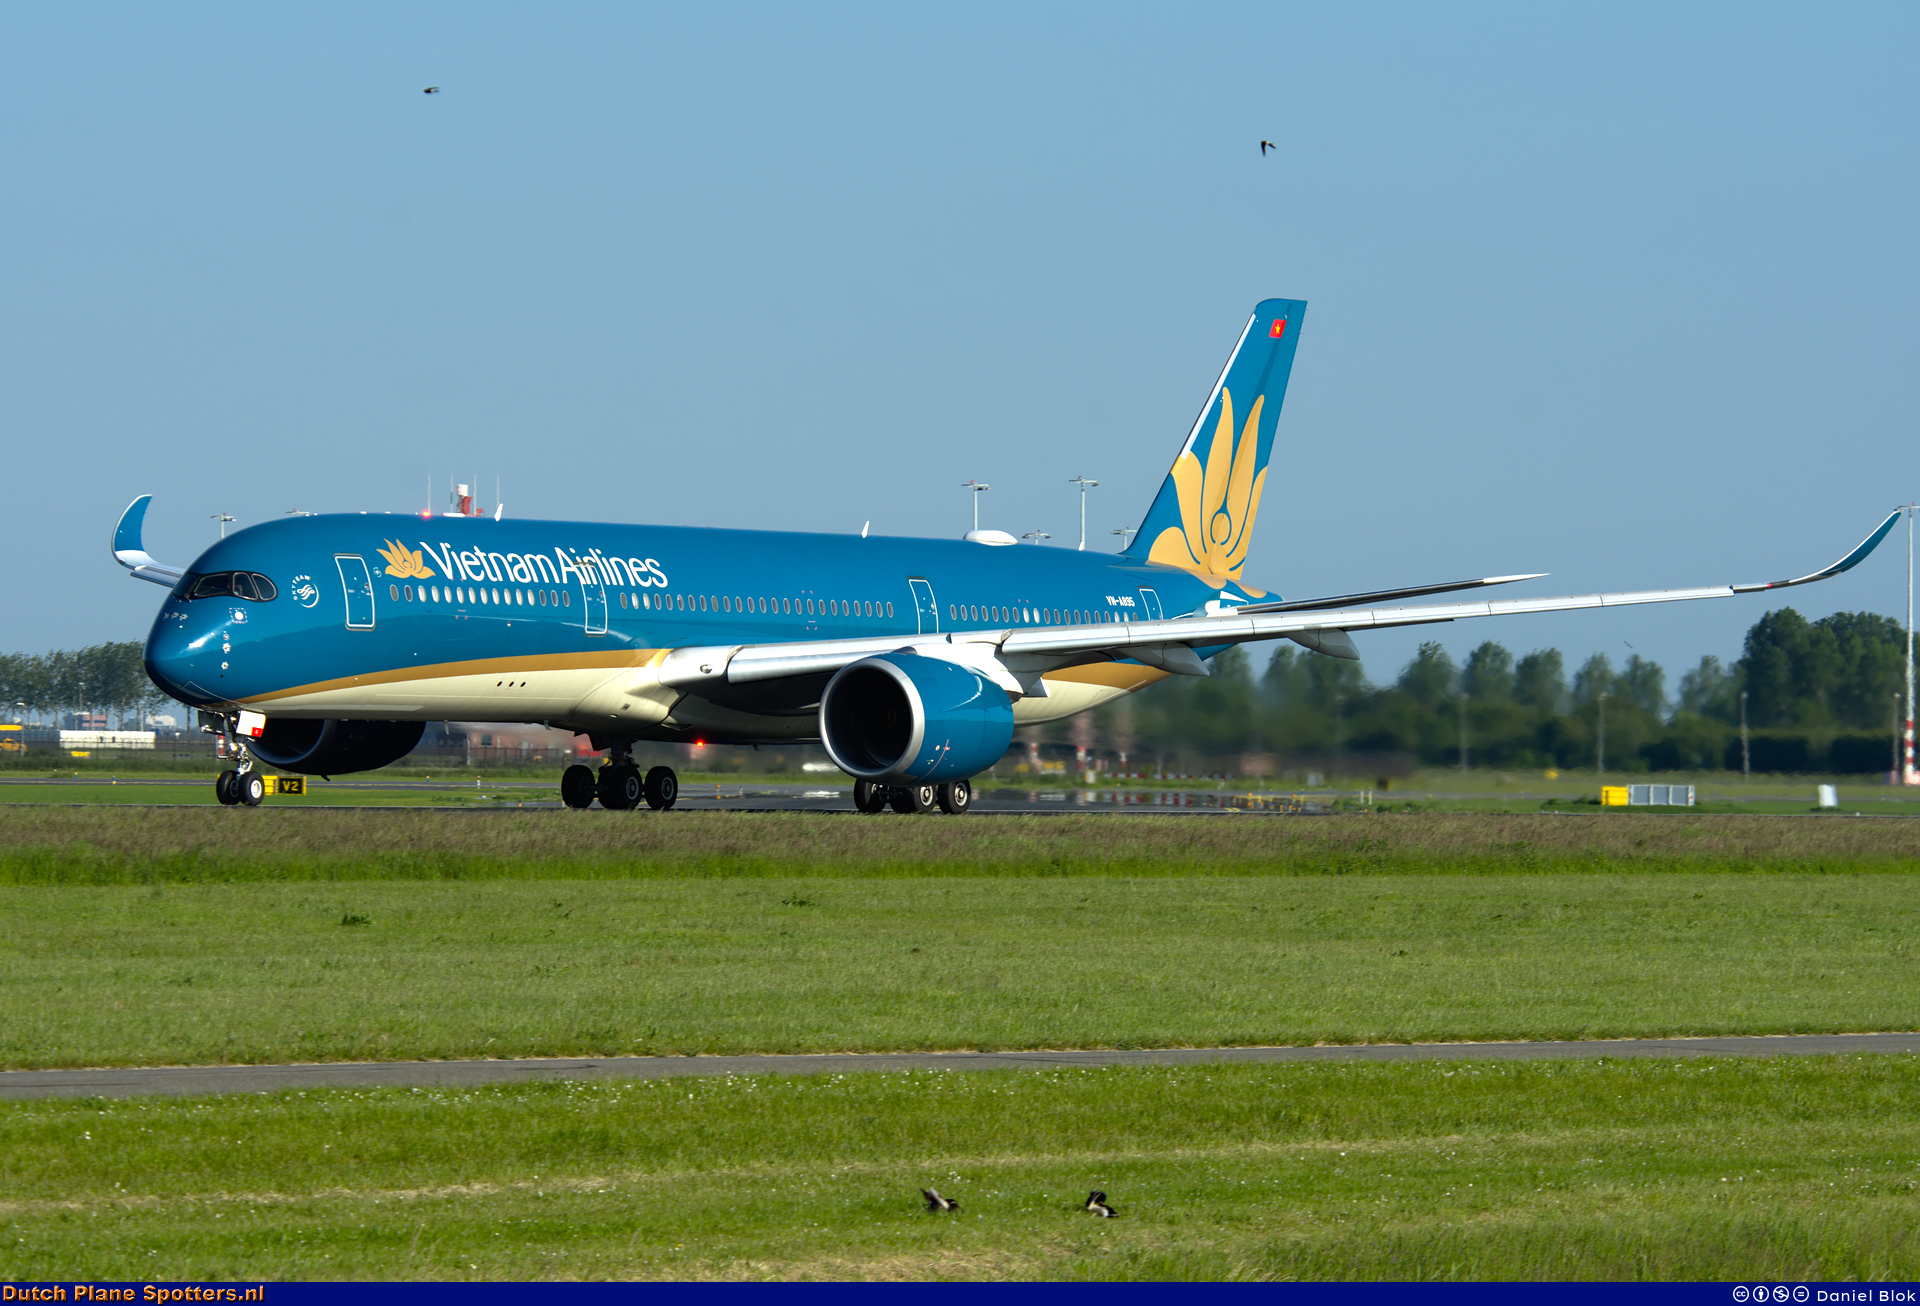 VN-A895 Airbus A350-900 Vietnam Airlines by Daniel Blok